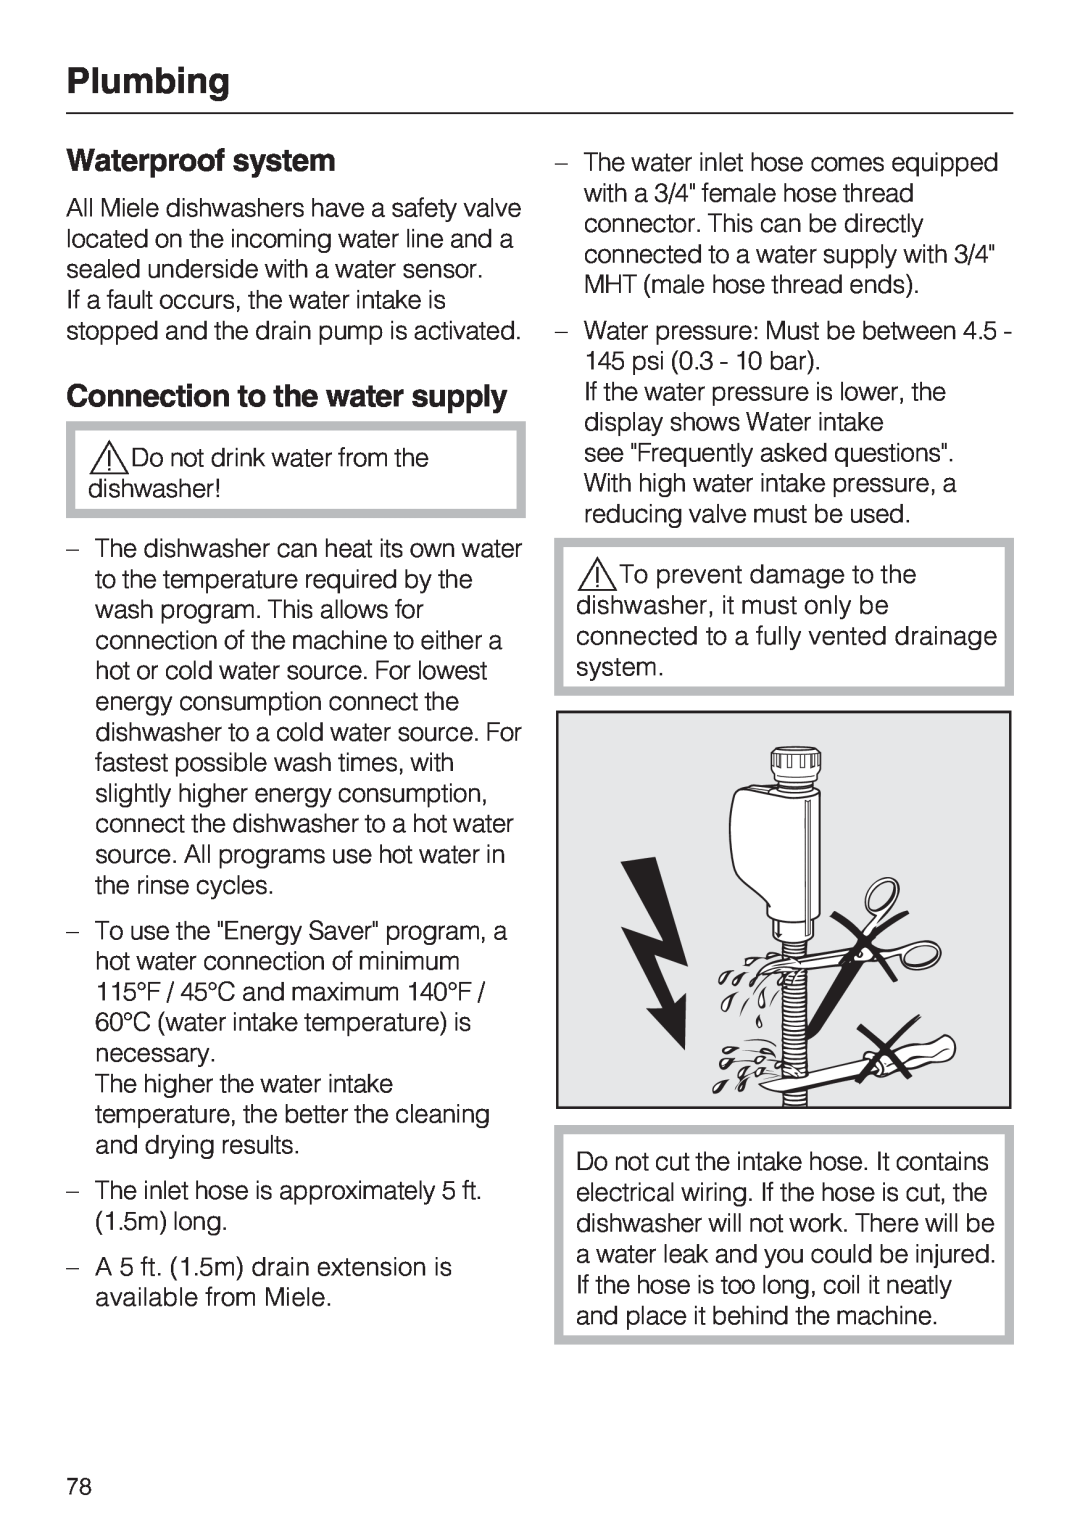 Miele G 2872 operating instructions Plumbing, Waterproof system, Connection to the water supply 